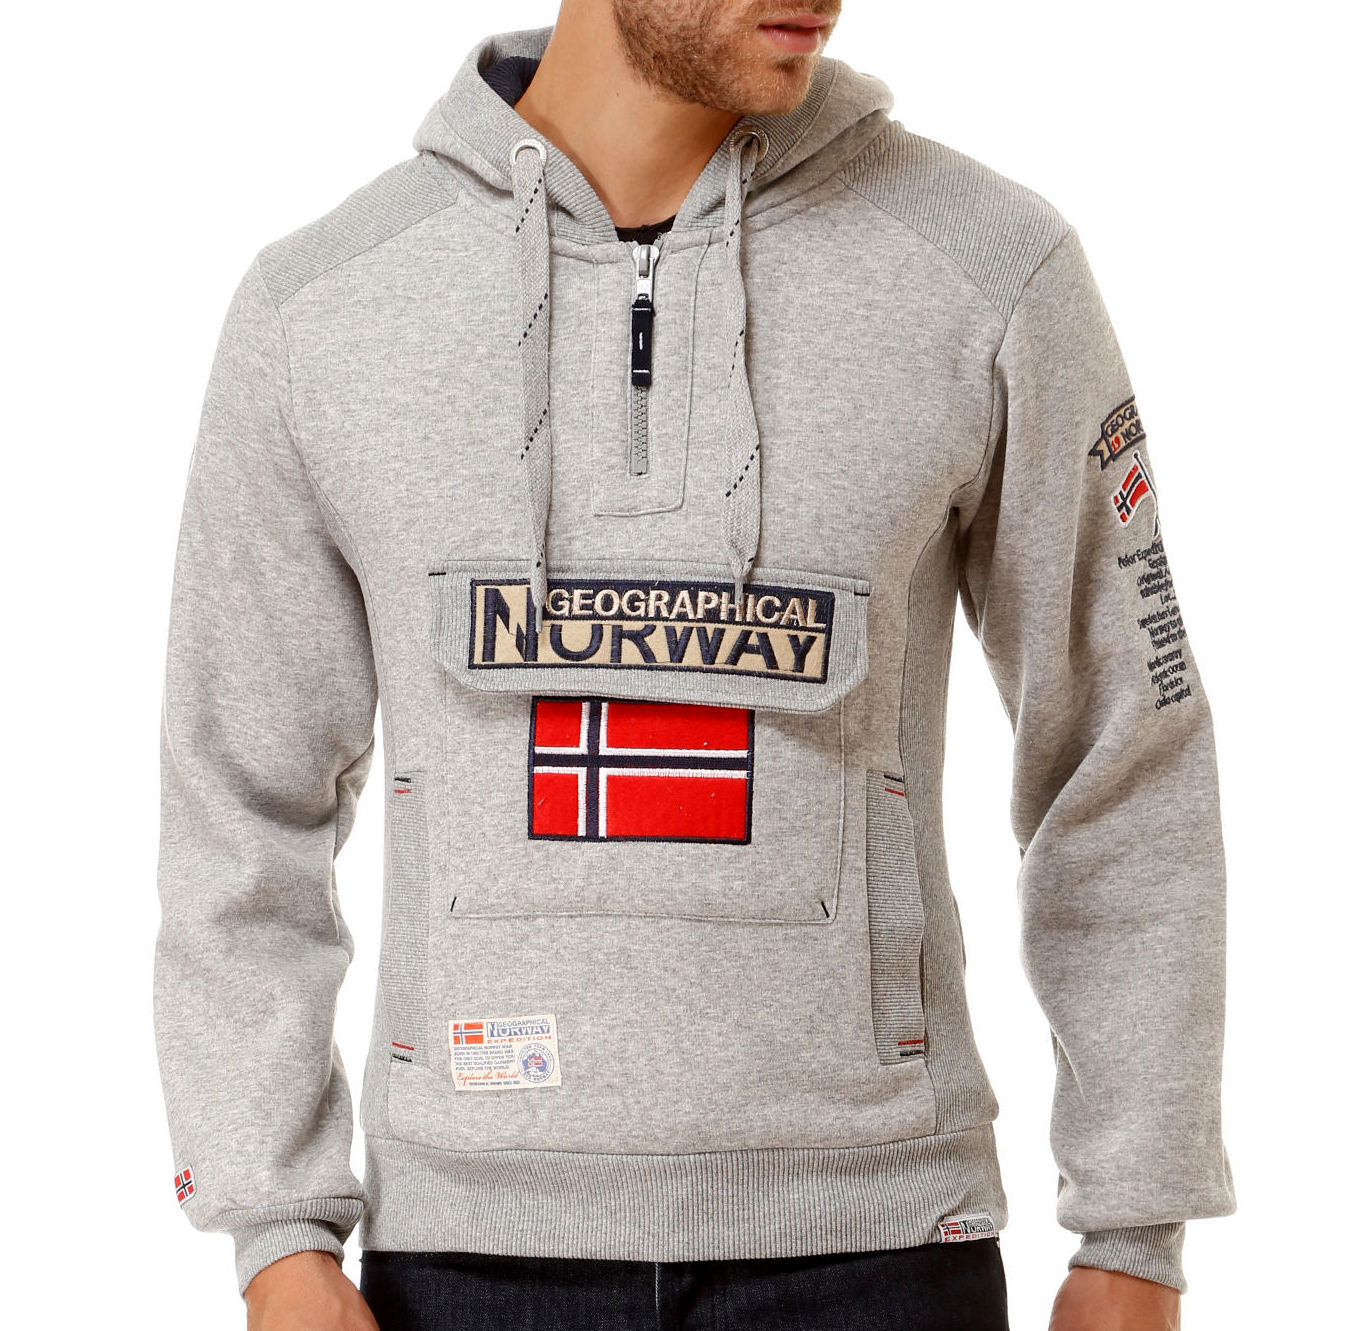 Geographical Norway sudadera - Geographical Norway España ®